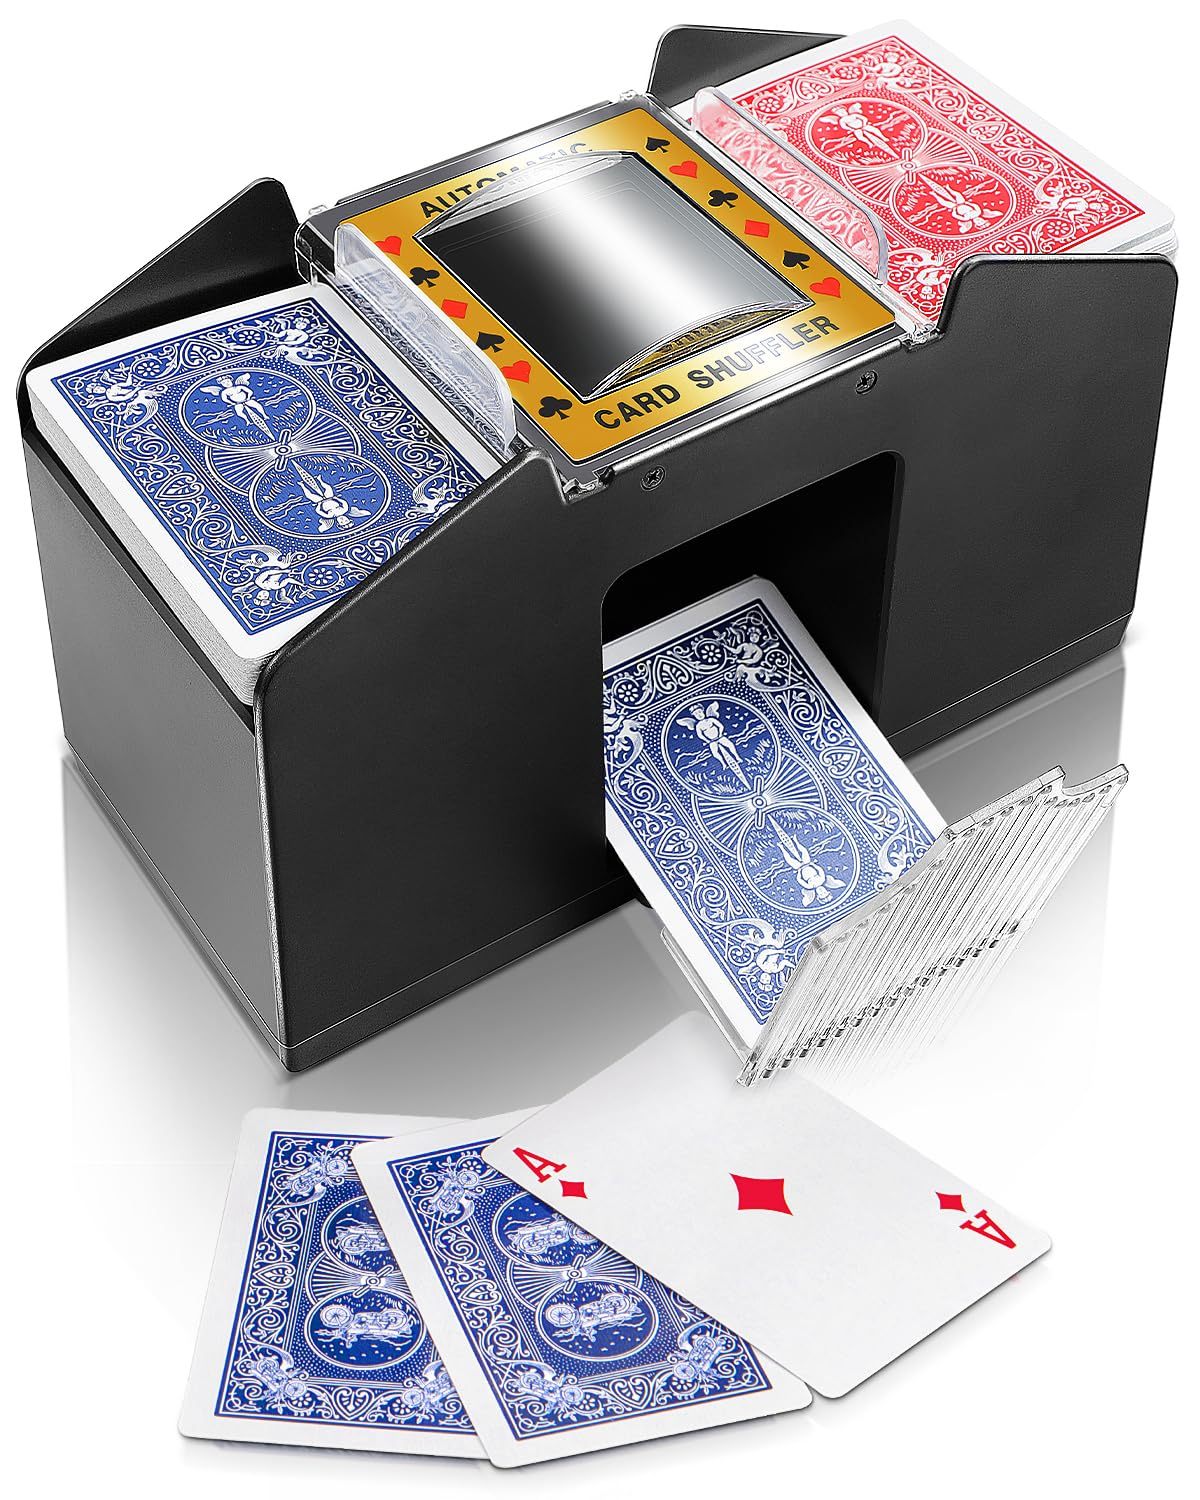 ✨50% OFF TODAY✨Automatic Poker Card Shuffling Machine "Free Your Hands"